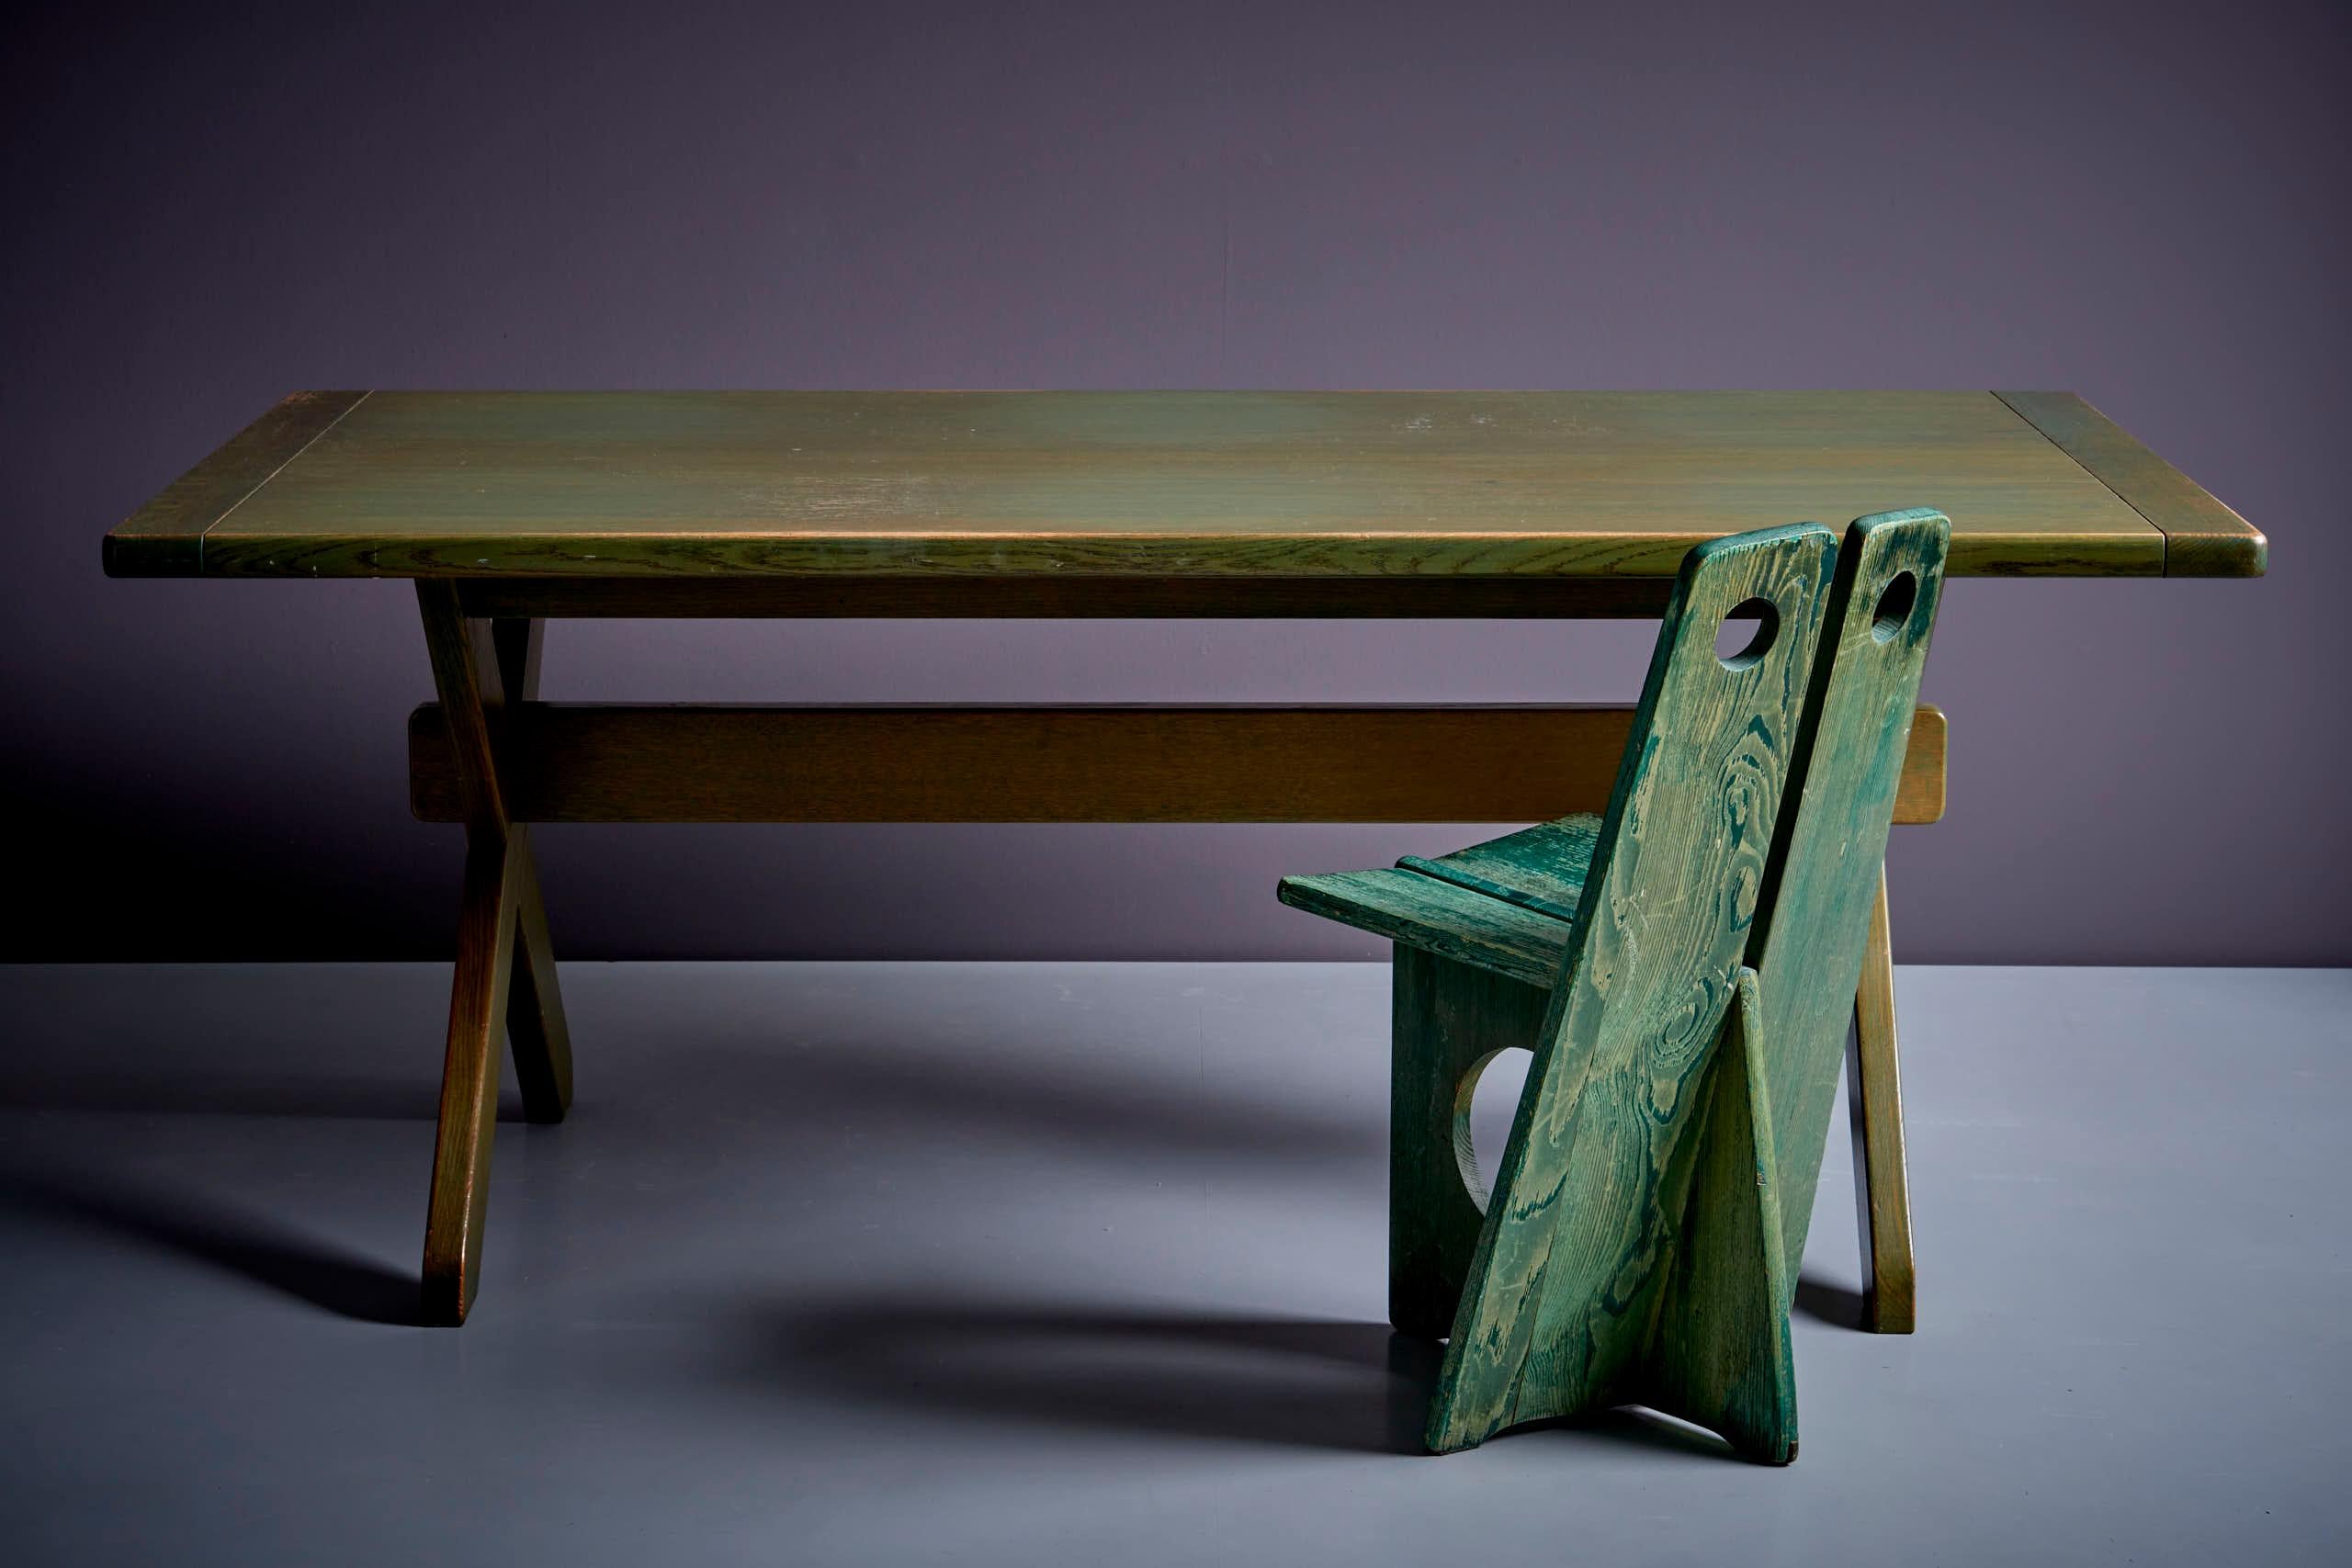 WK Möbel Dining Table in Green Pine Wood, Germany - 1960s For Sale 5